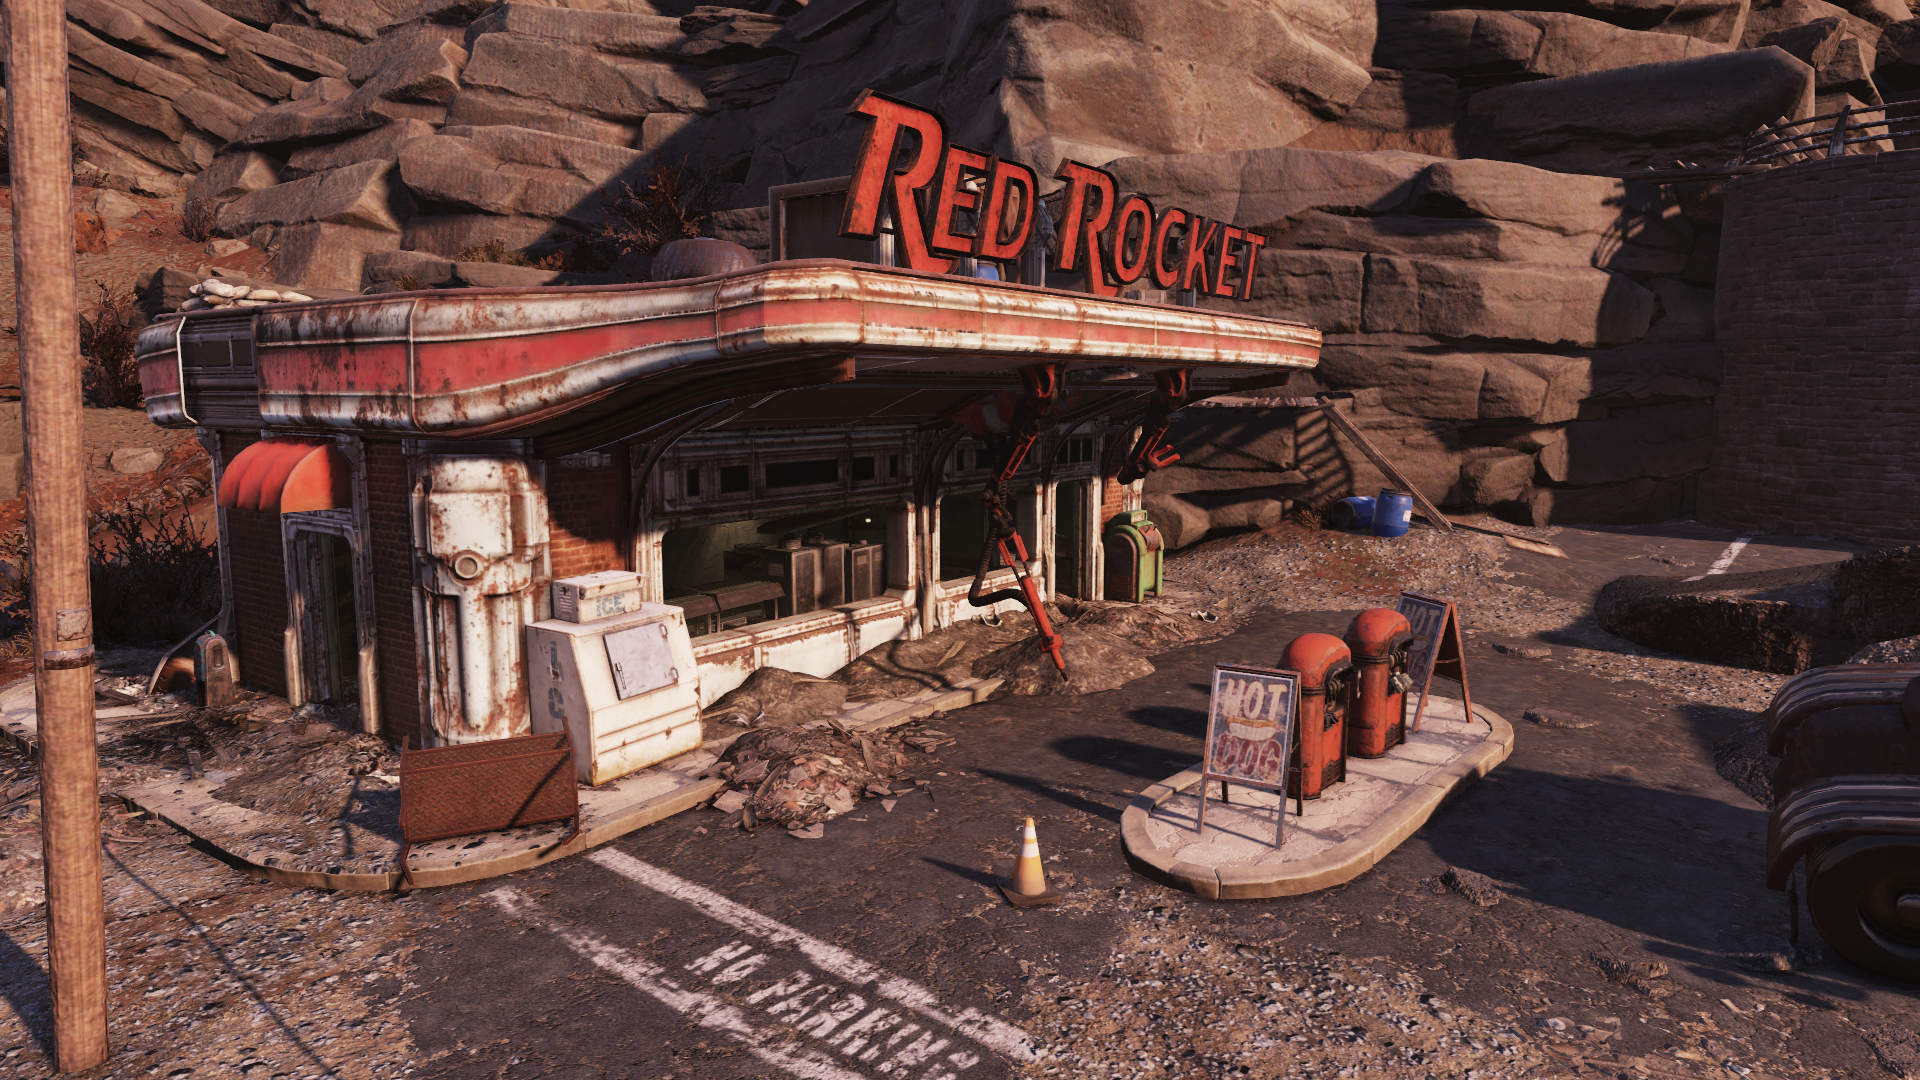 Red rocket fallout 4 фото 119